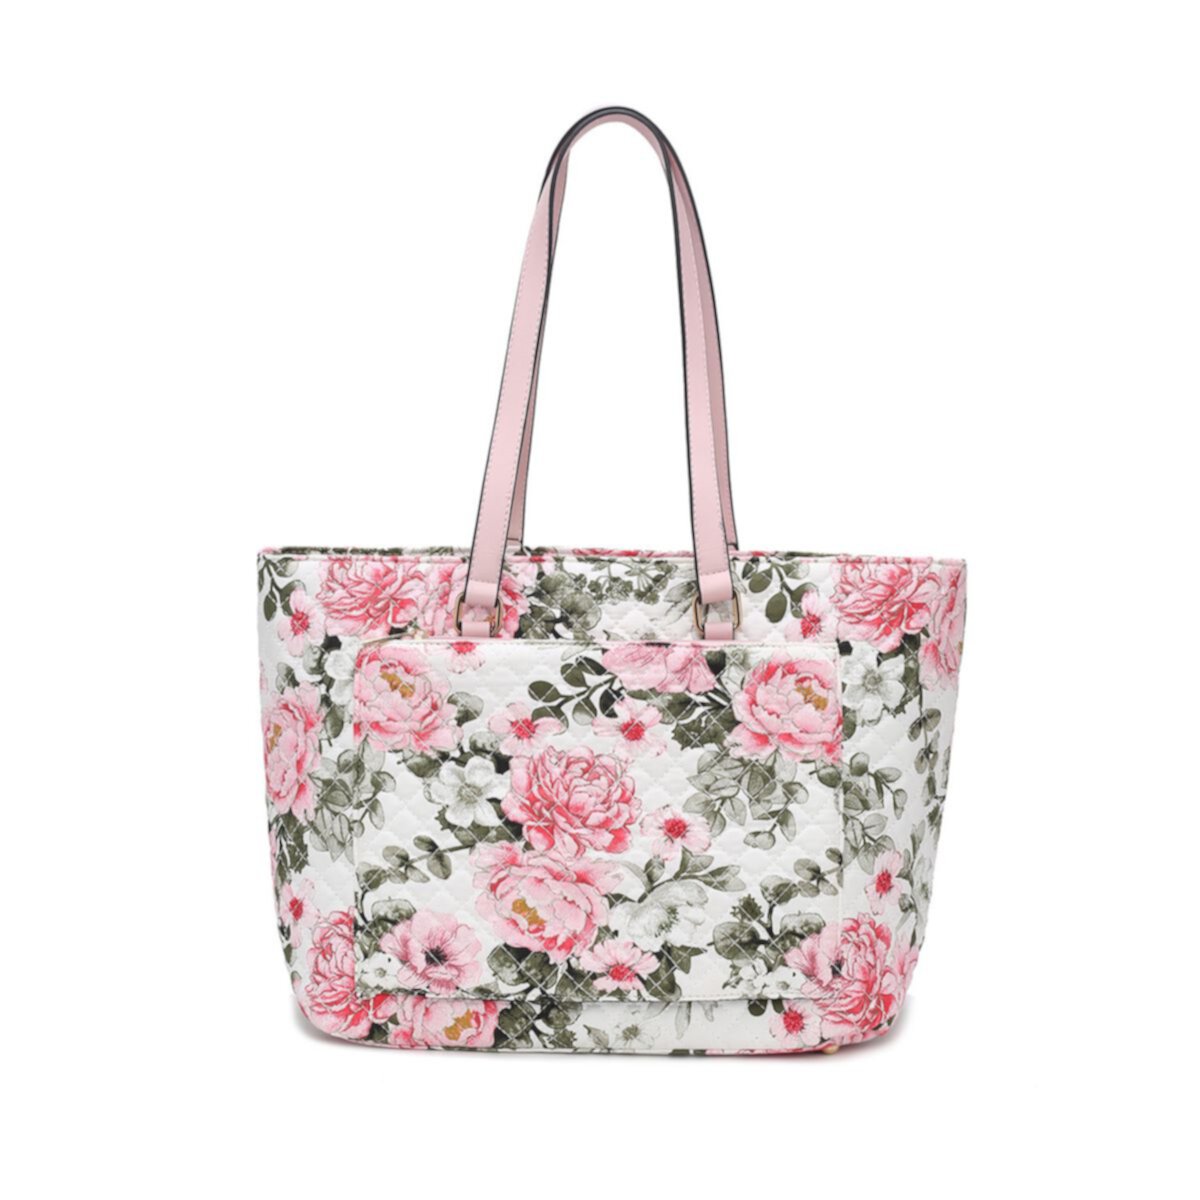 Mkf Collection Hallie Quilted Cotton Botanical Pattern Women’s Tote Bag By Mia K MKF Collection